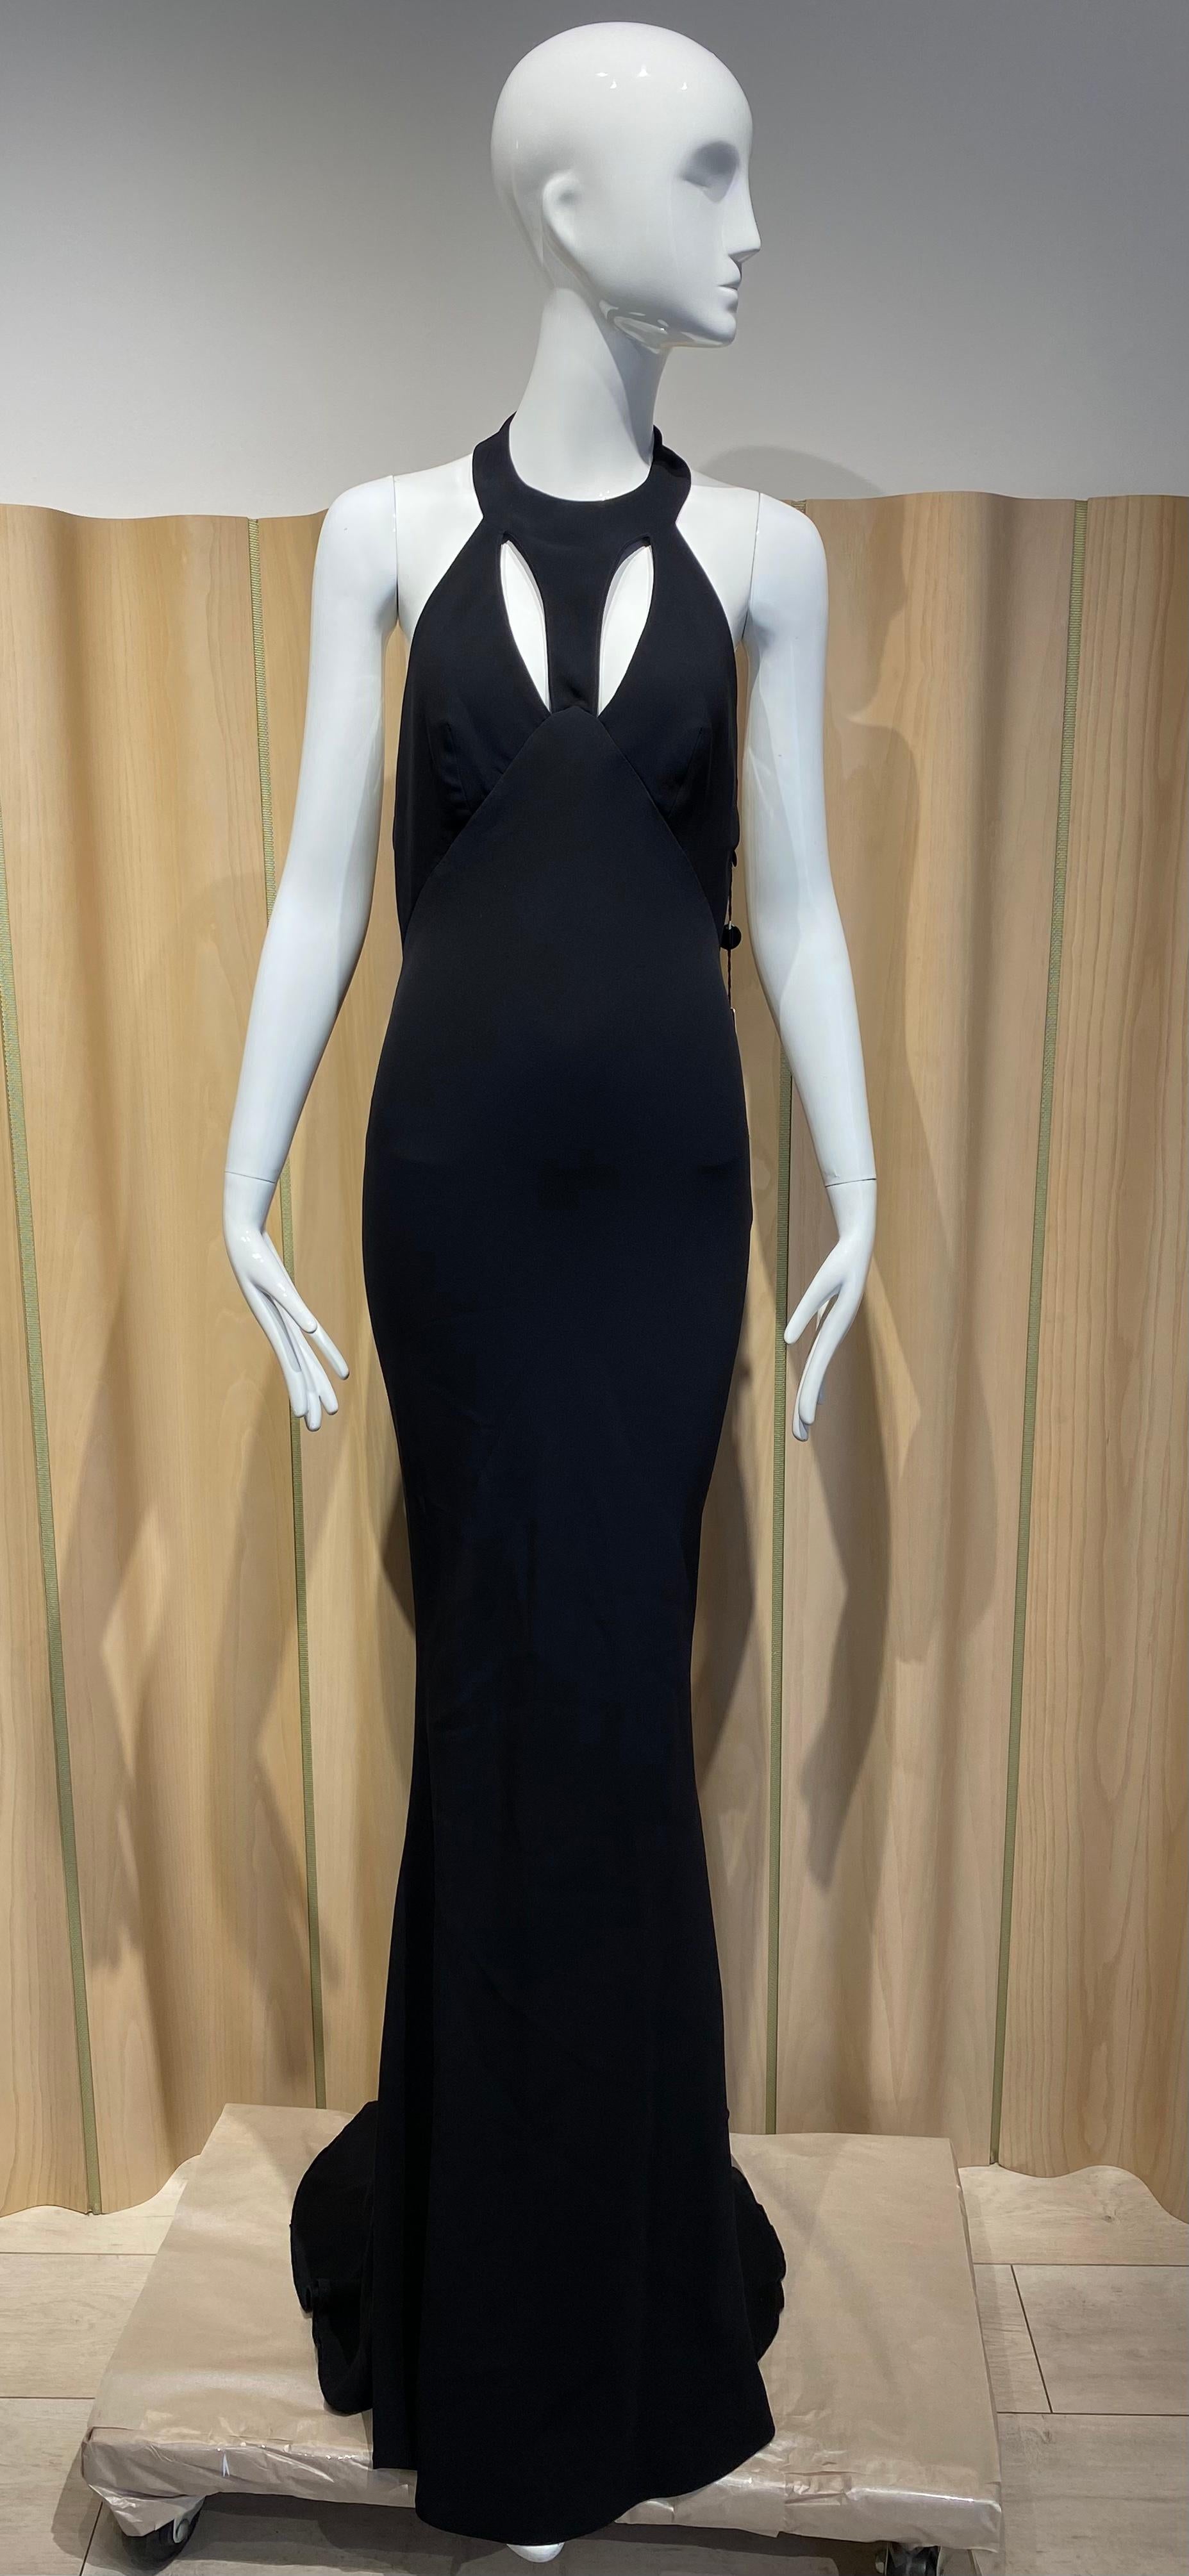 Sexy 90s Gianni Versace Black Cut out gown. Dress marked size 42
See measurement:
Bust: 34” / Waist 28” / Hip: 38” 
 